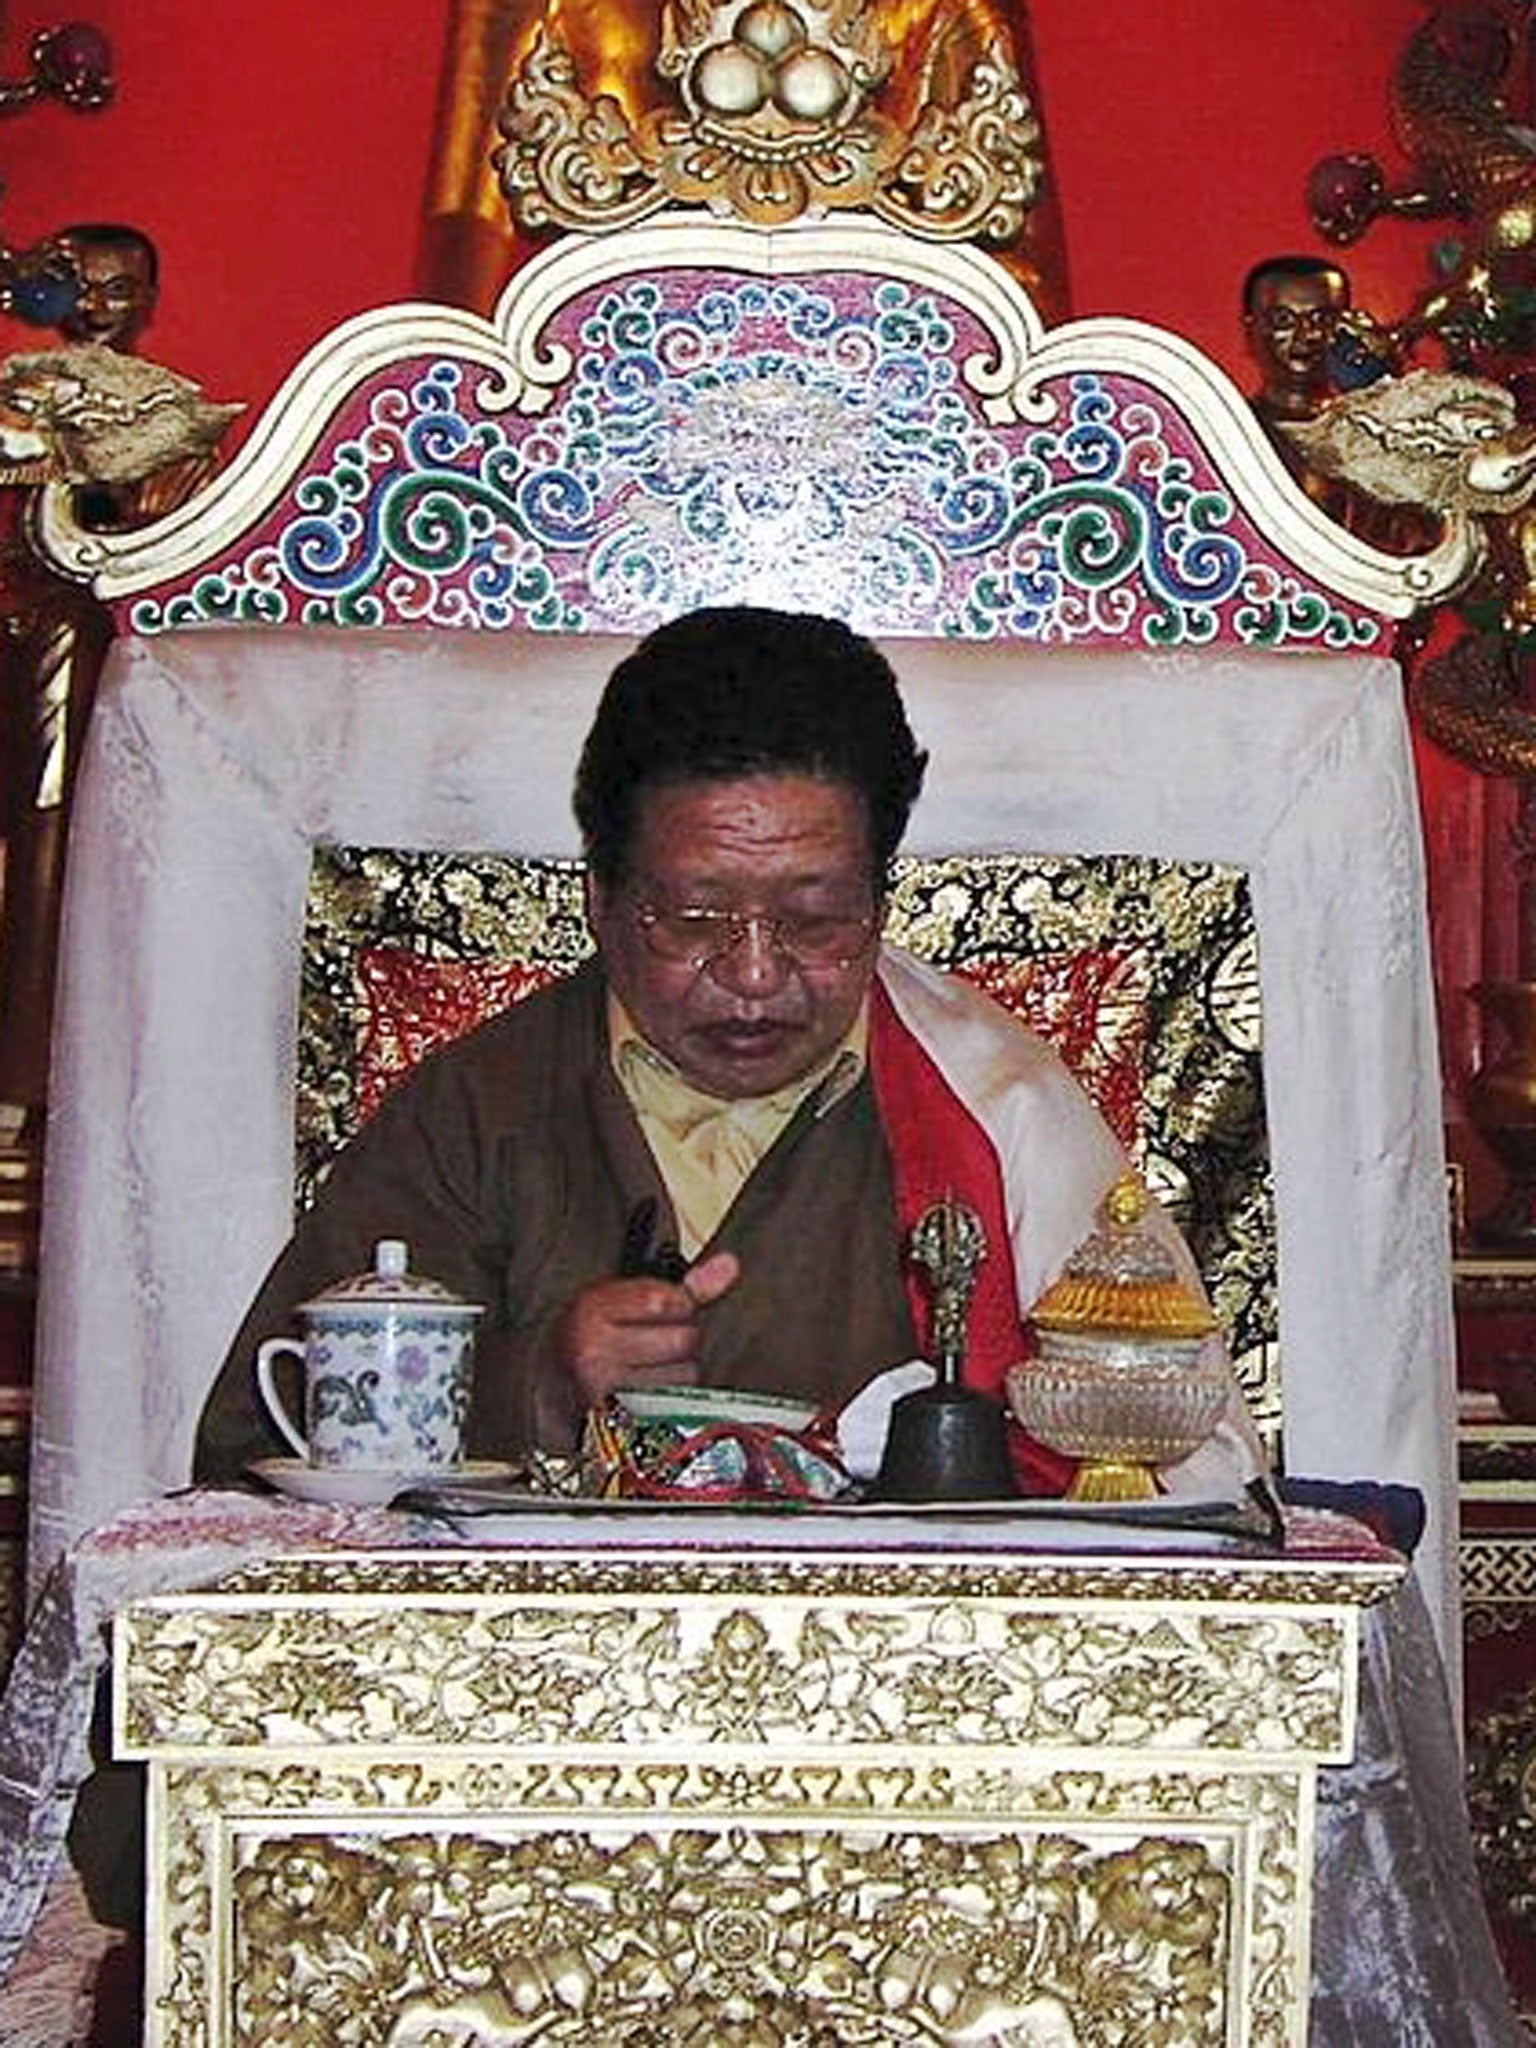 Akong Rinpoche on a throne at Samye Ling. The British Tibetan monk has been assassinated in China, according to police.